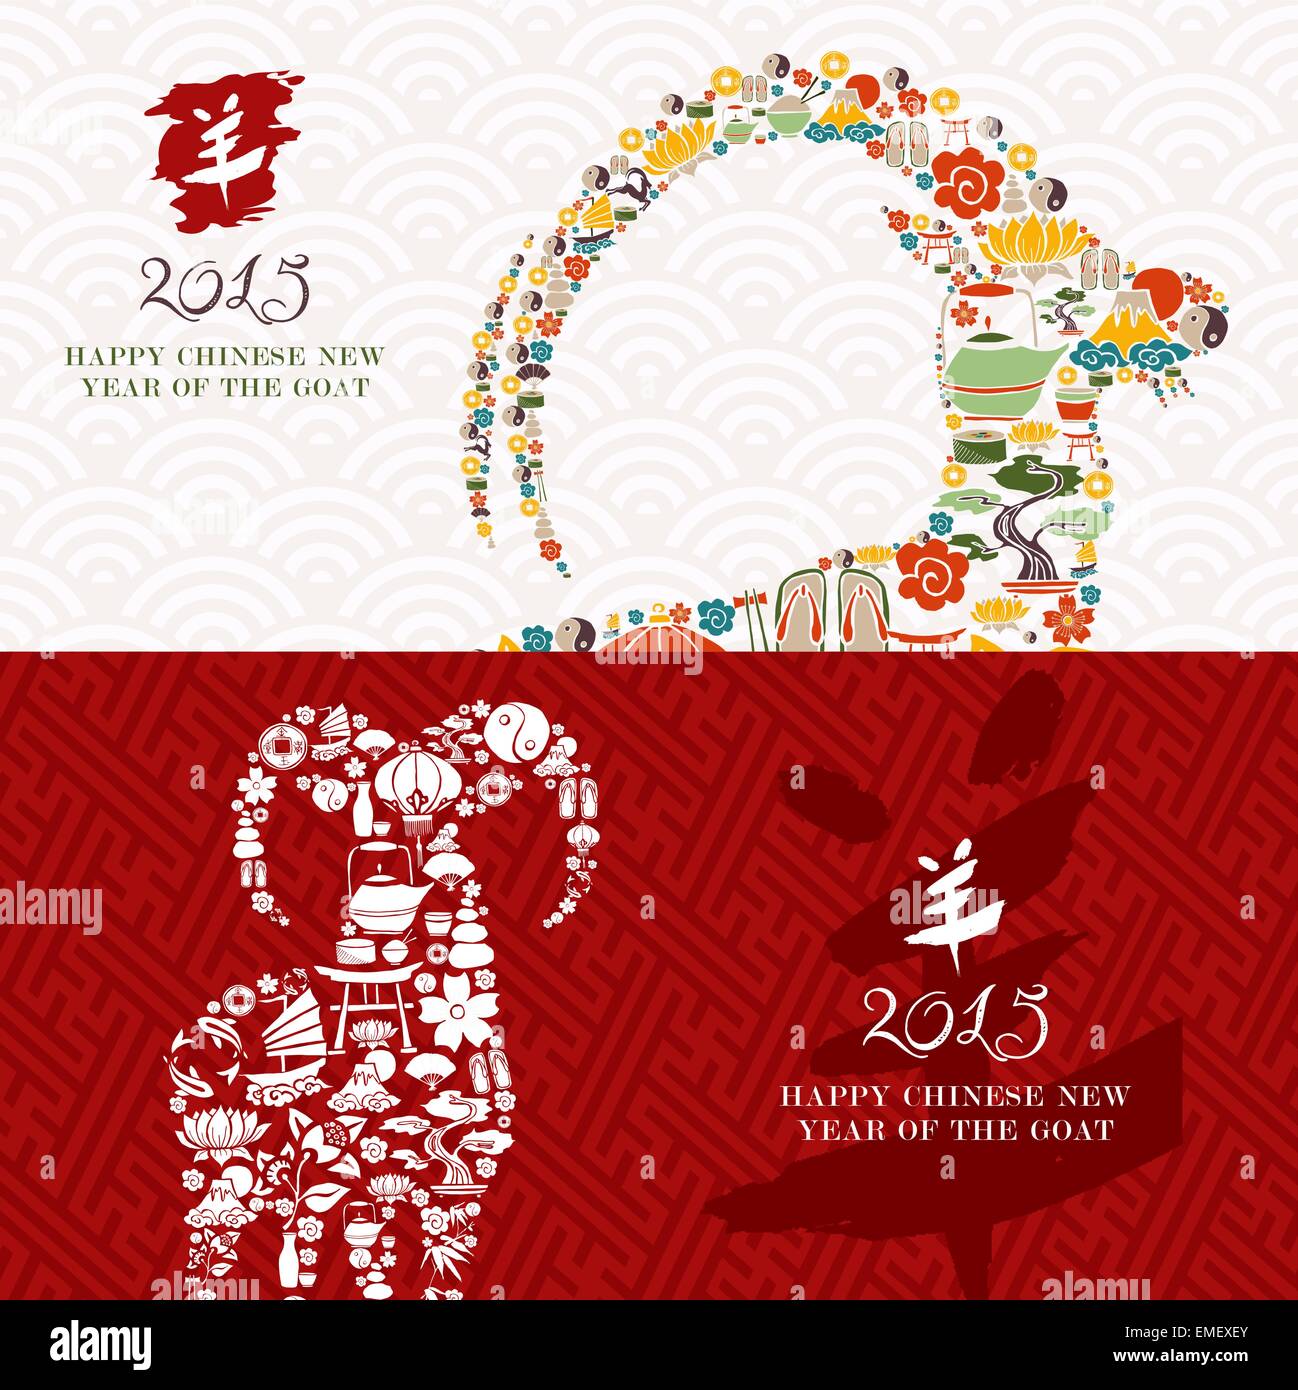 Chinese New year of the Goat 2015 icons greeting cards set Stock Vector